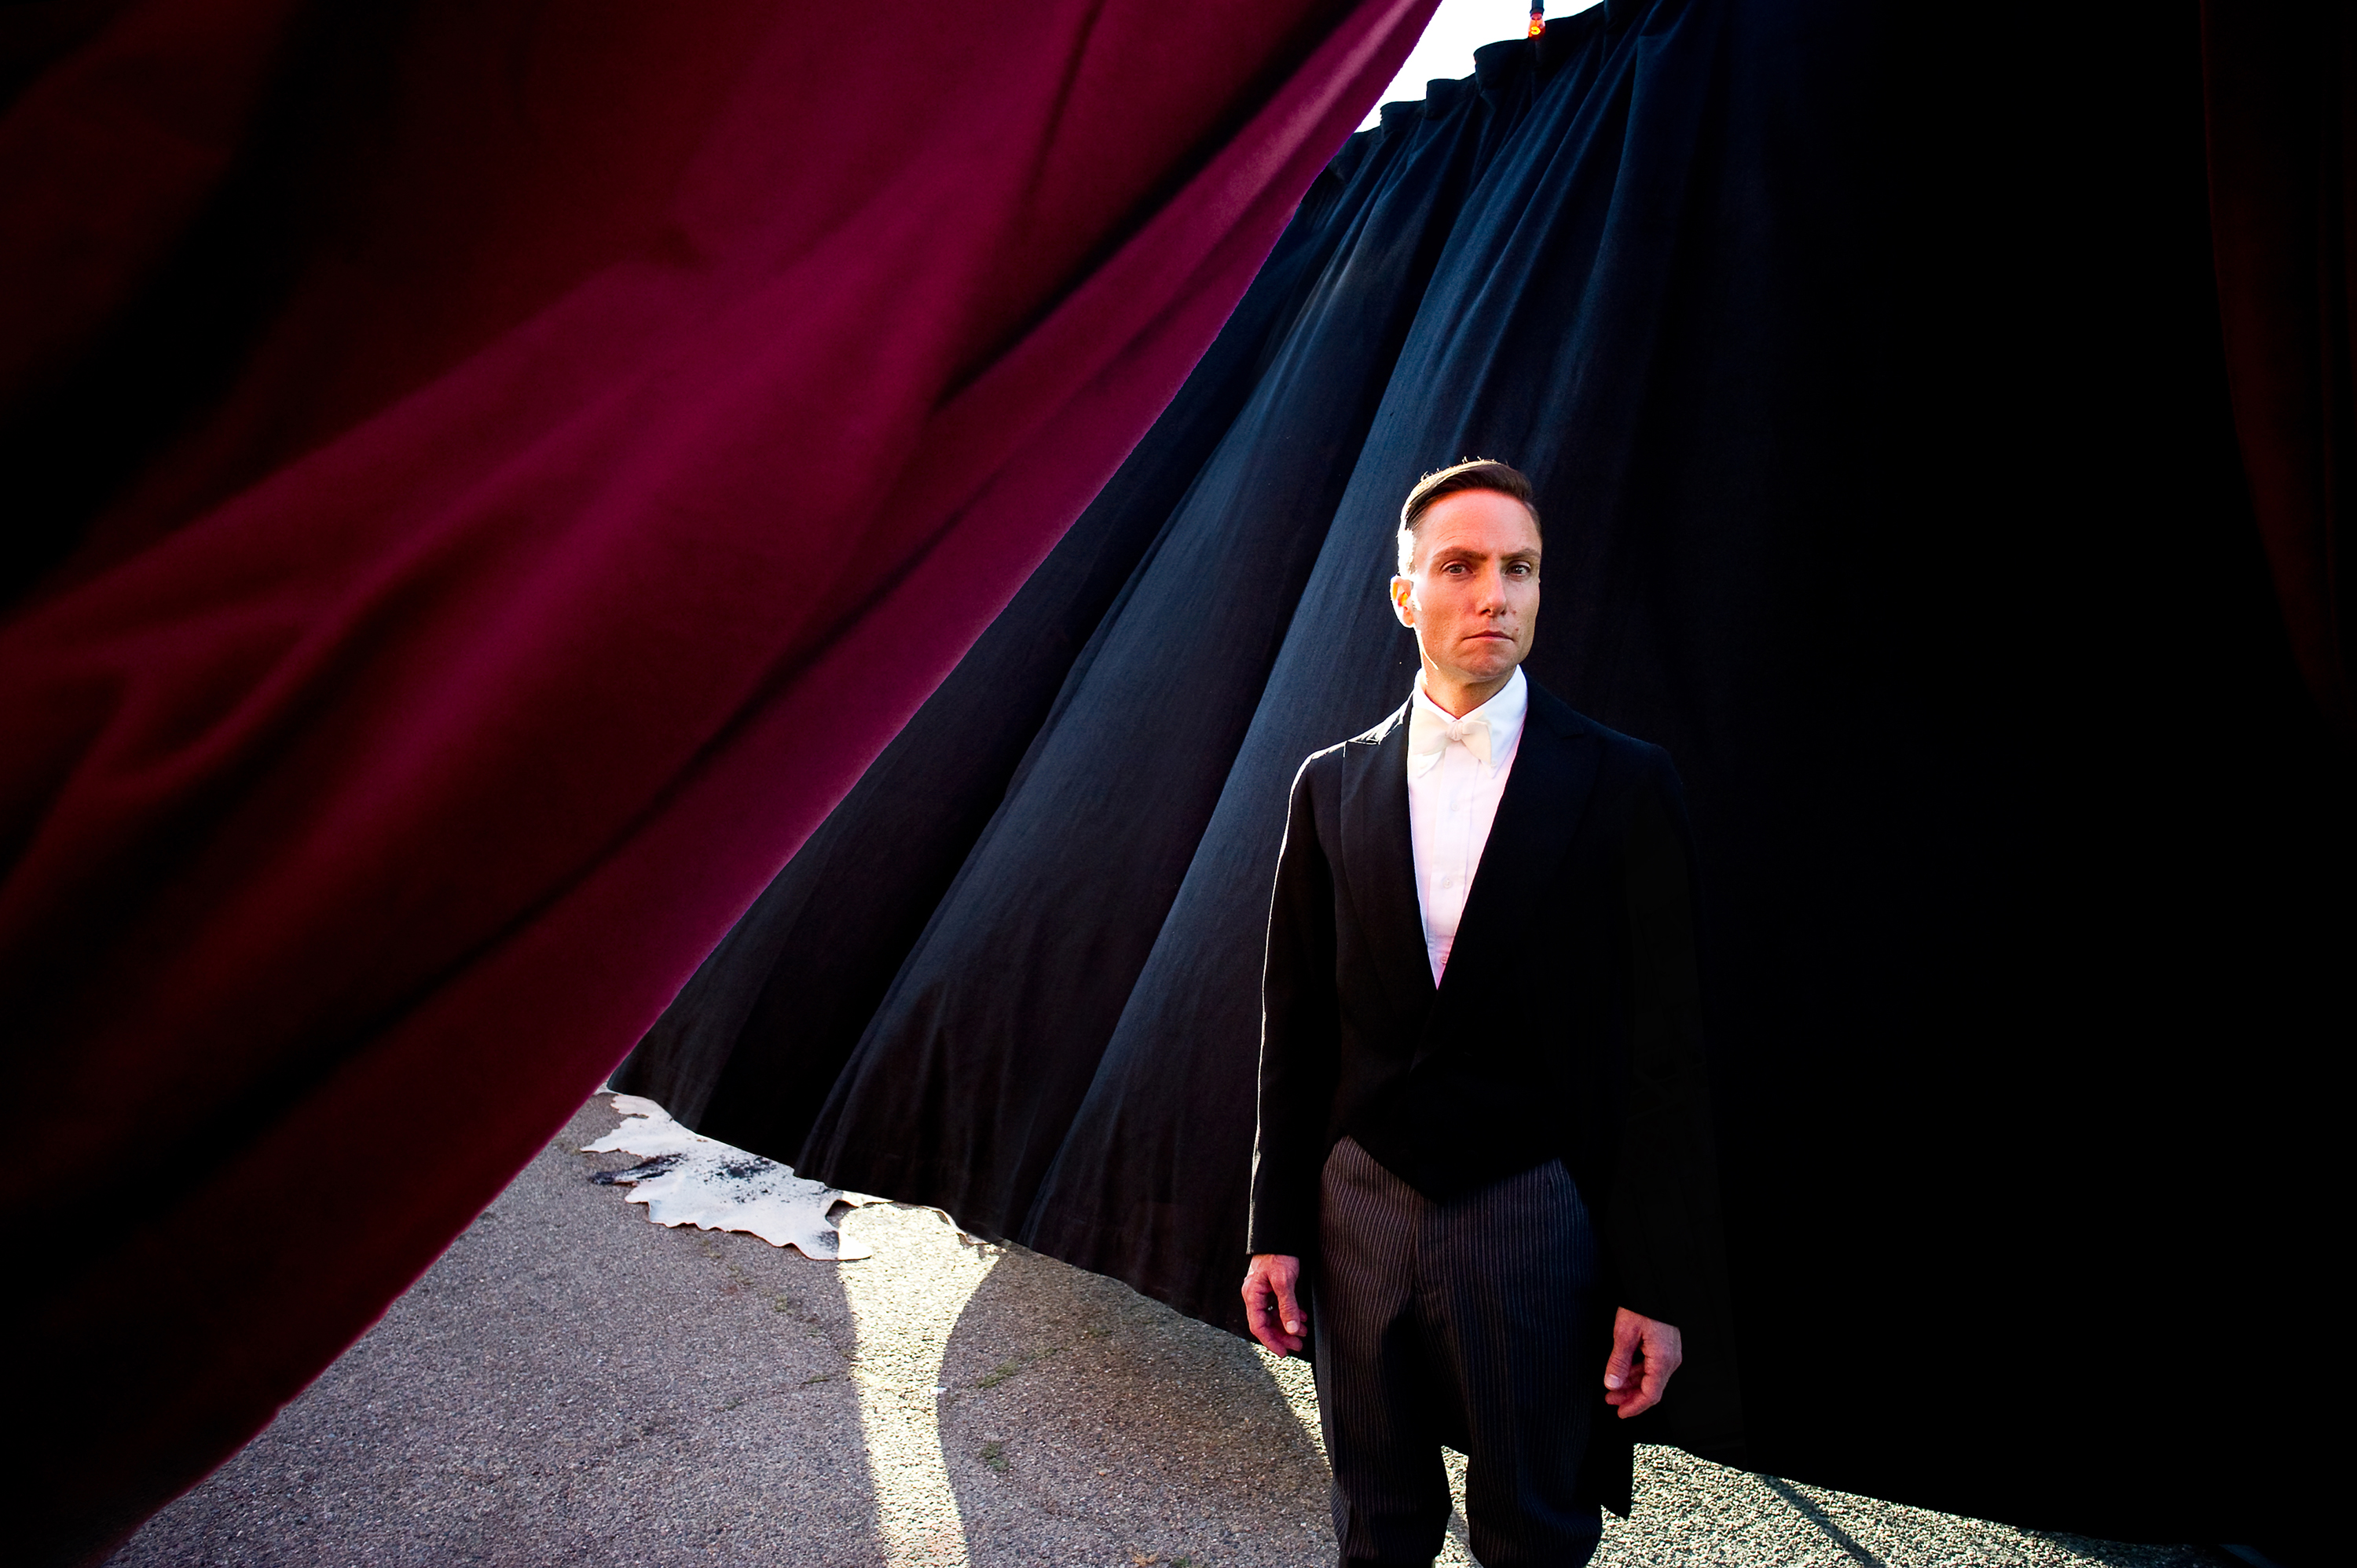 A man in a black tuxedo with a white shirt stands between large red and black curtains, with part of the ground visible beneath them. The setting appears formal.